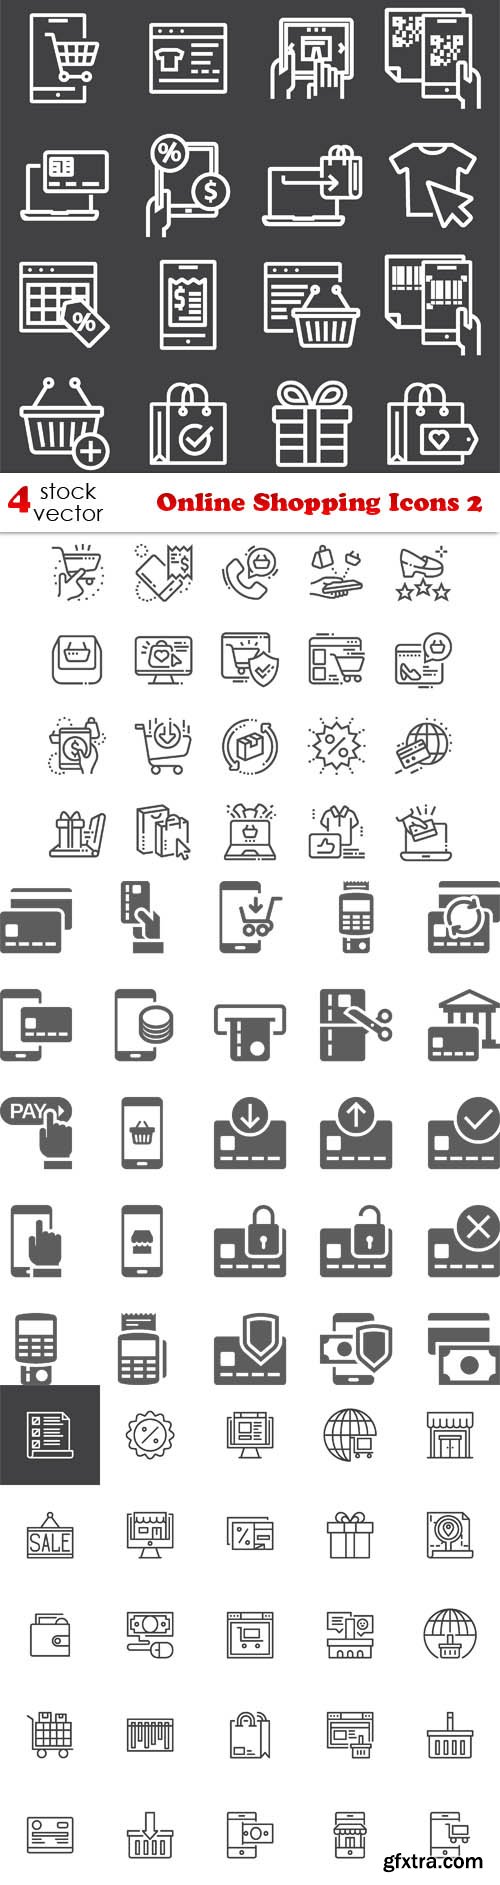 Vectors - Online Shopping Icons 2